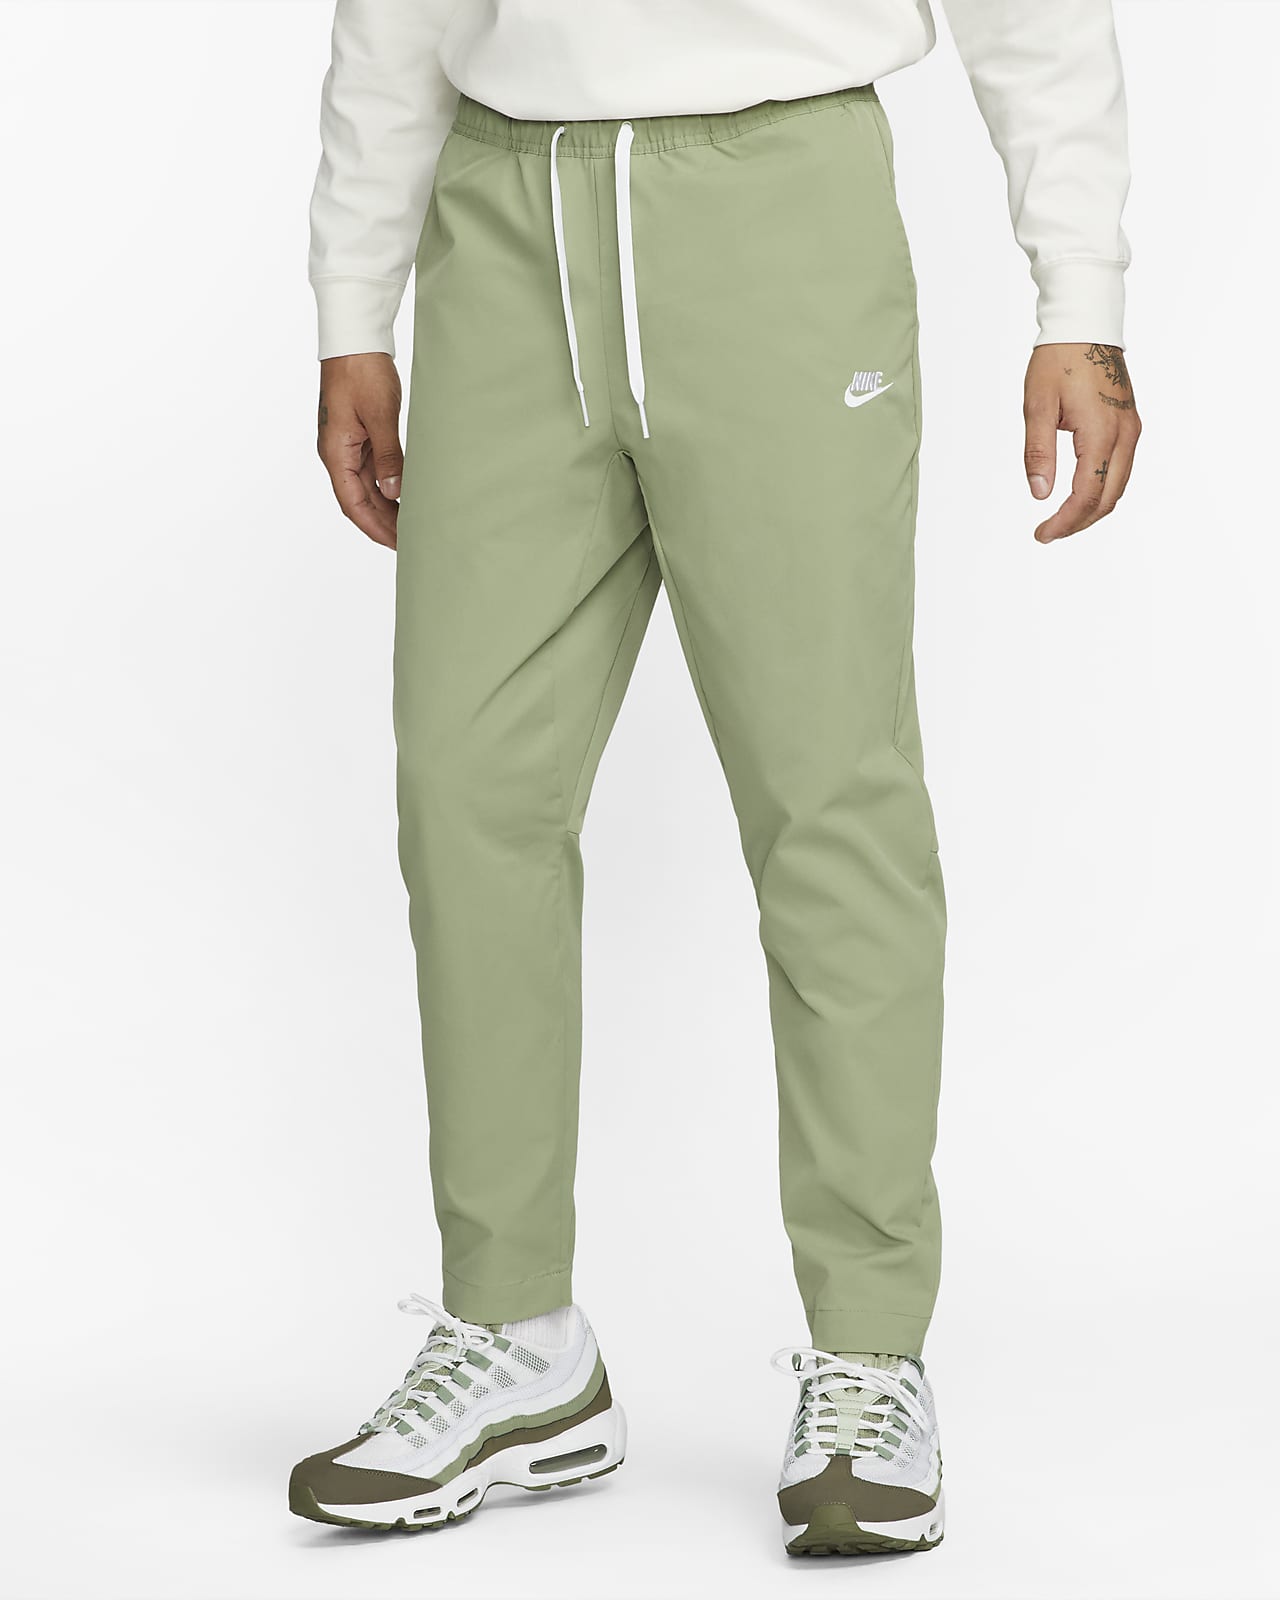 Club Men's Woven Tapered-Leg Trousers. Nike HR